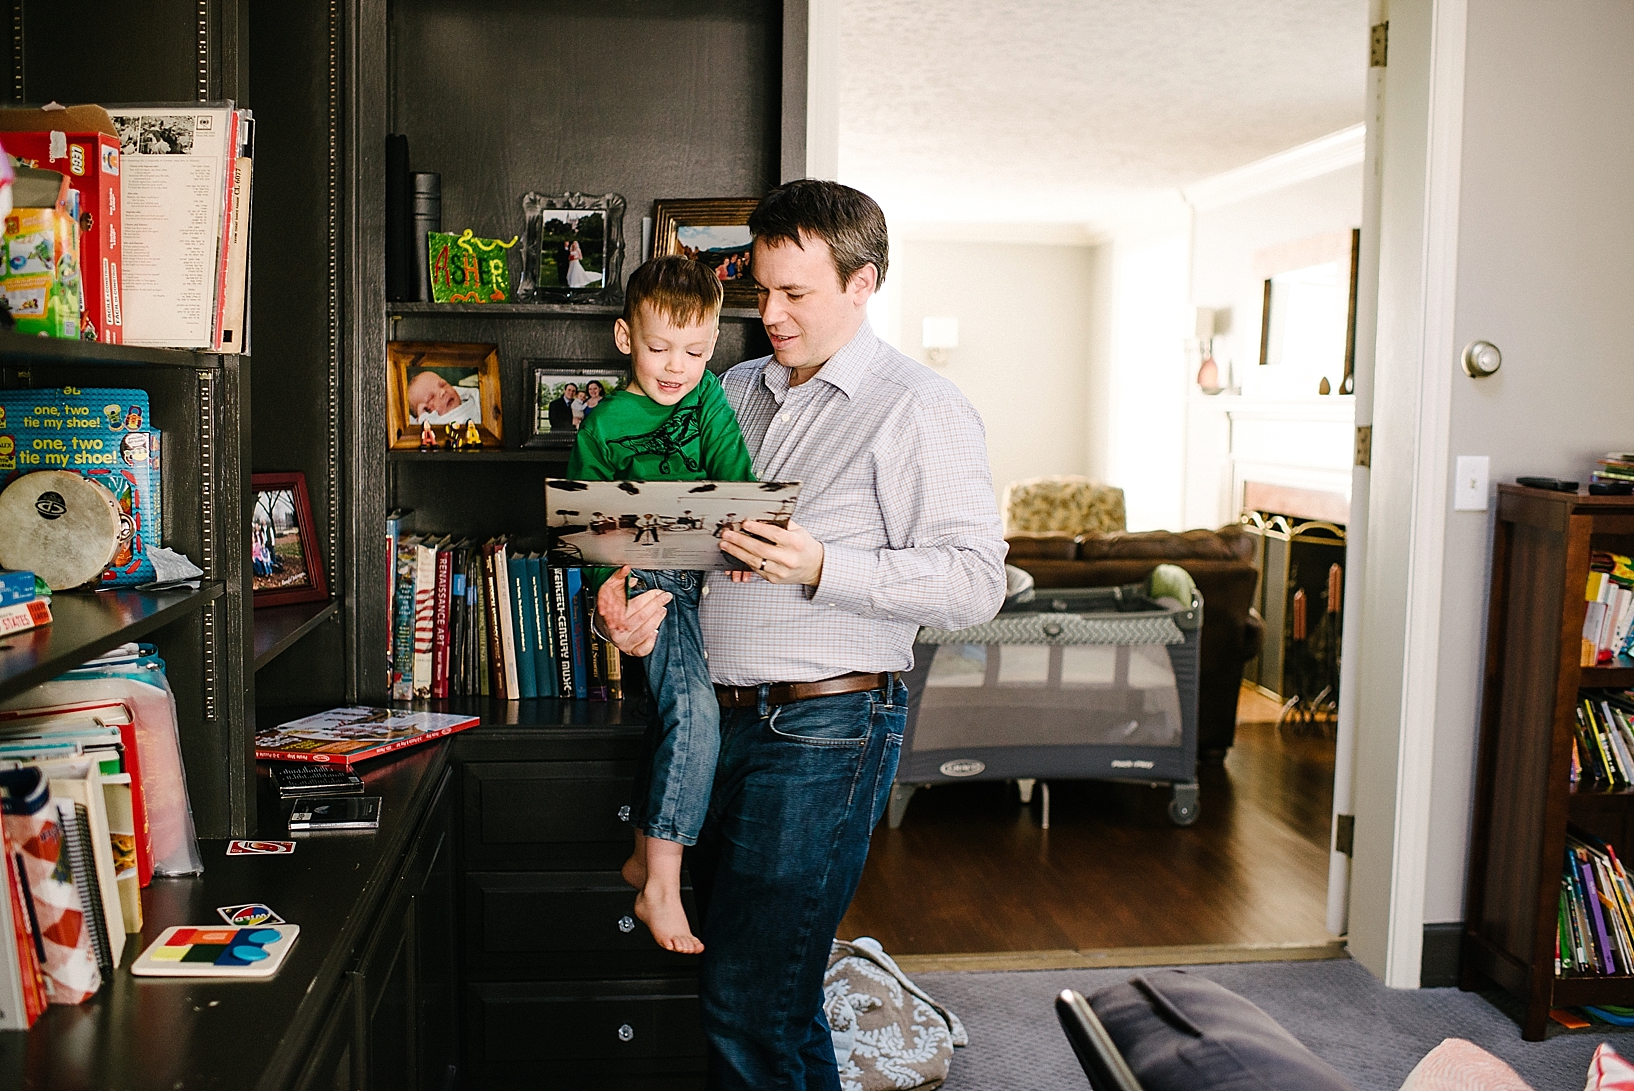 man holding son in living room looking at records